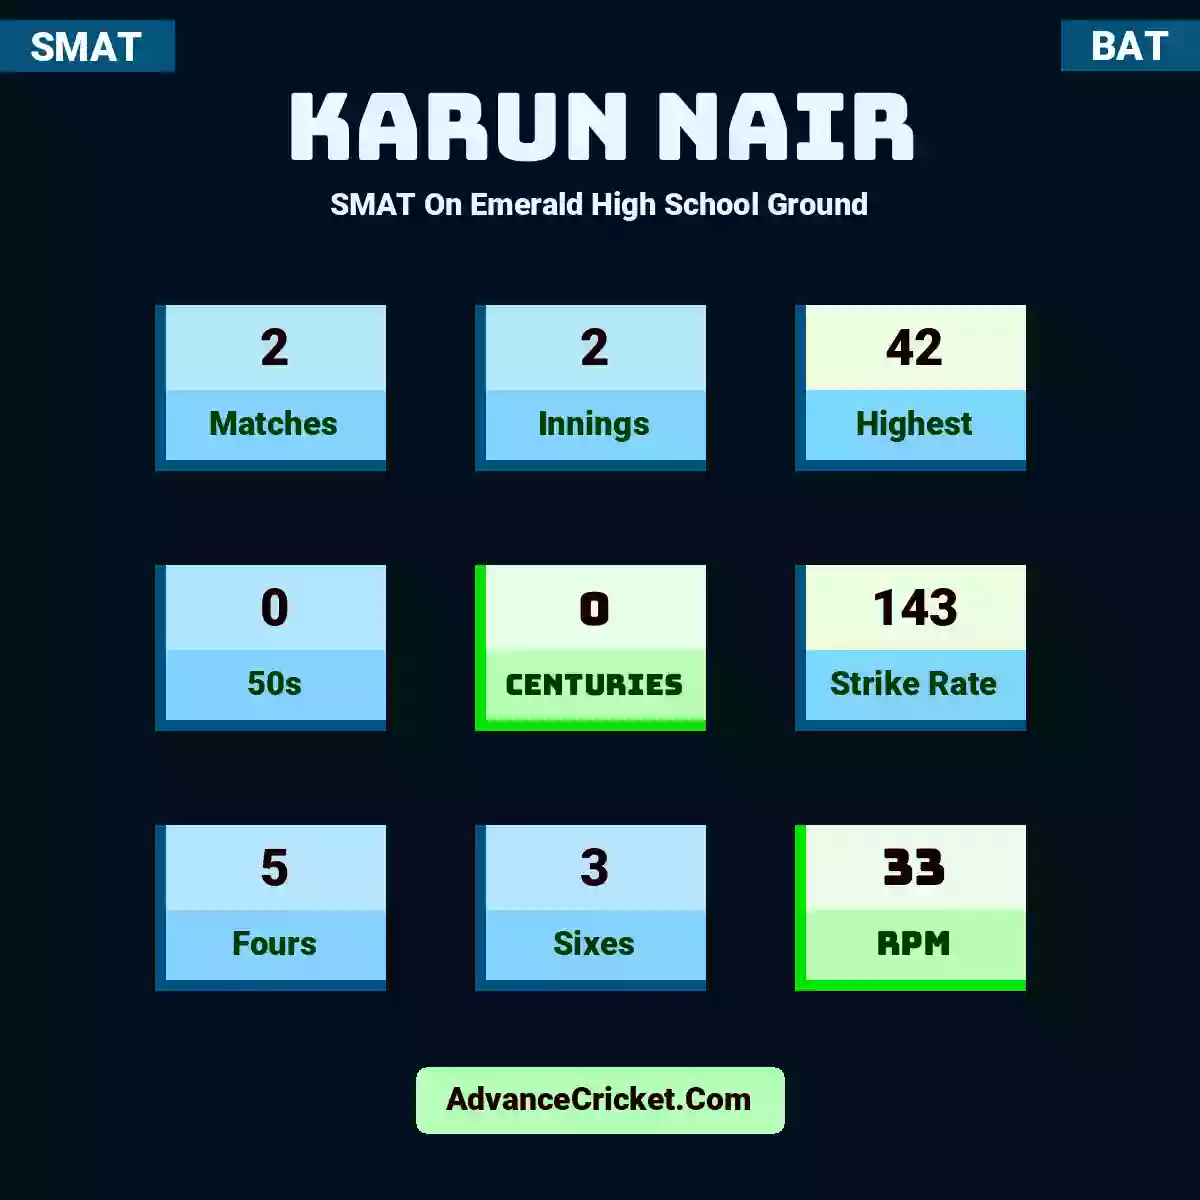 Karun Nair SMAT  On Emerald High School Ground, Karun Nair played 2 matches, scored 42 runs as highest, 0 half-centuries, and 0 centuries, with a strike rate of 143. K.Nair hit 5 fours and 3 sixes, with an RPM of 33.